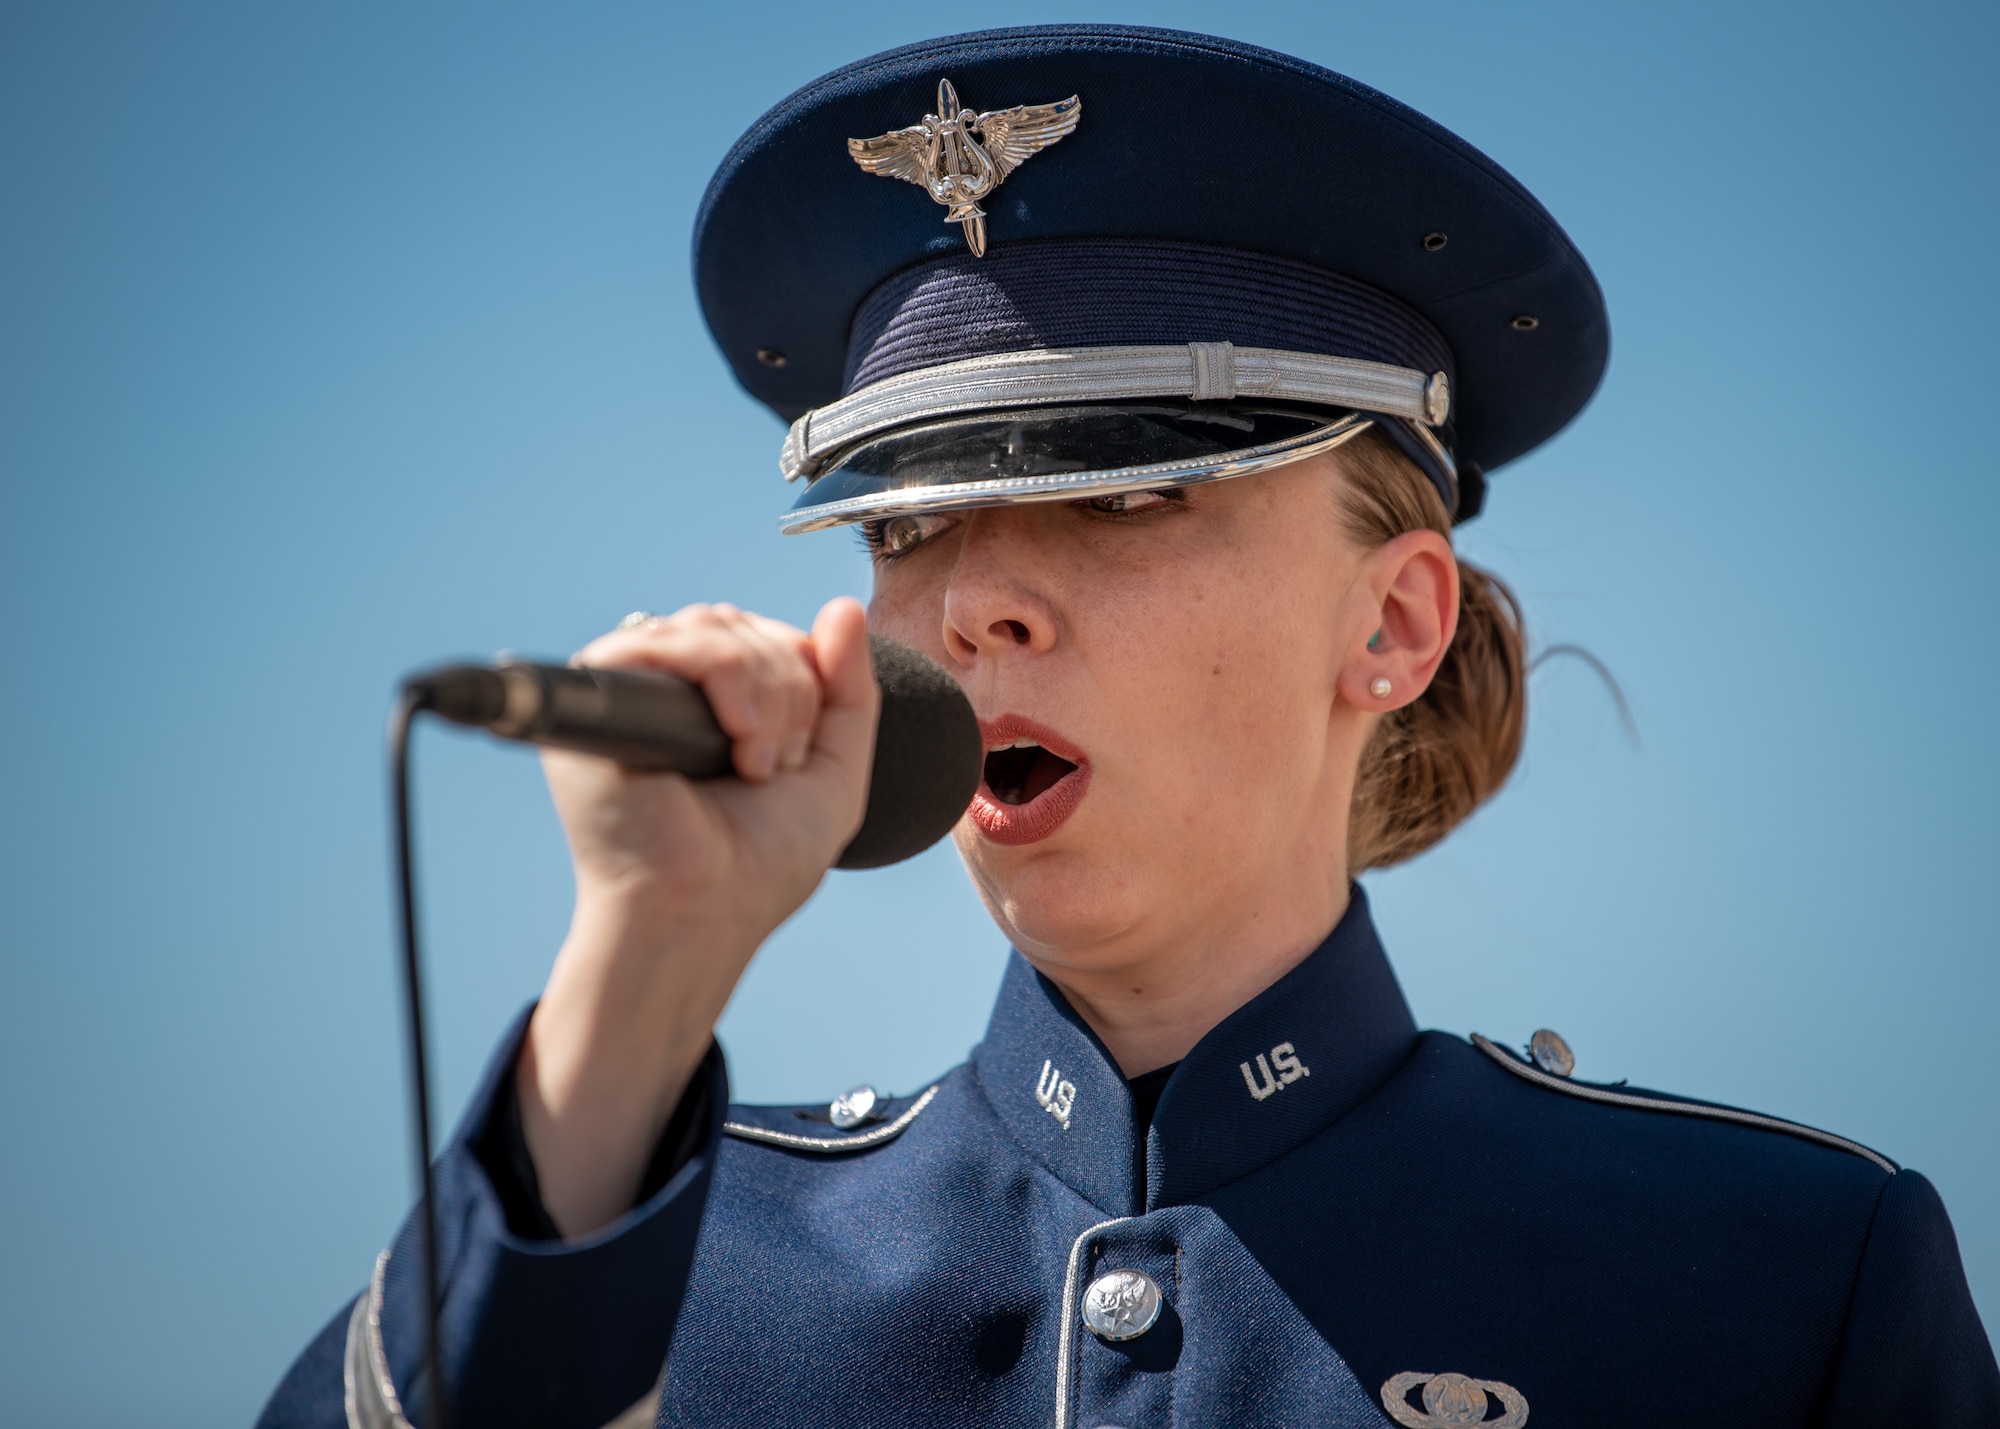 Staff Sgt. Melissa Griffith, a bandsman with the U.S. Air Force Band of Mid-America, performs the Star Spangled Banner during the opening ceremony of the Thunder Over Louisville air show in downtown Louisville, Ky., April 23, 2022. This year’s event celebrated the 75th anniversary of the United States Air Force. (U.S. Air National Guard photo by Dale Greer)